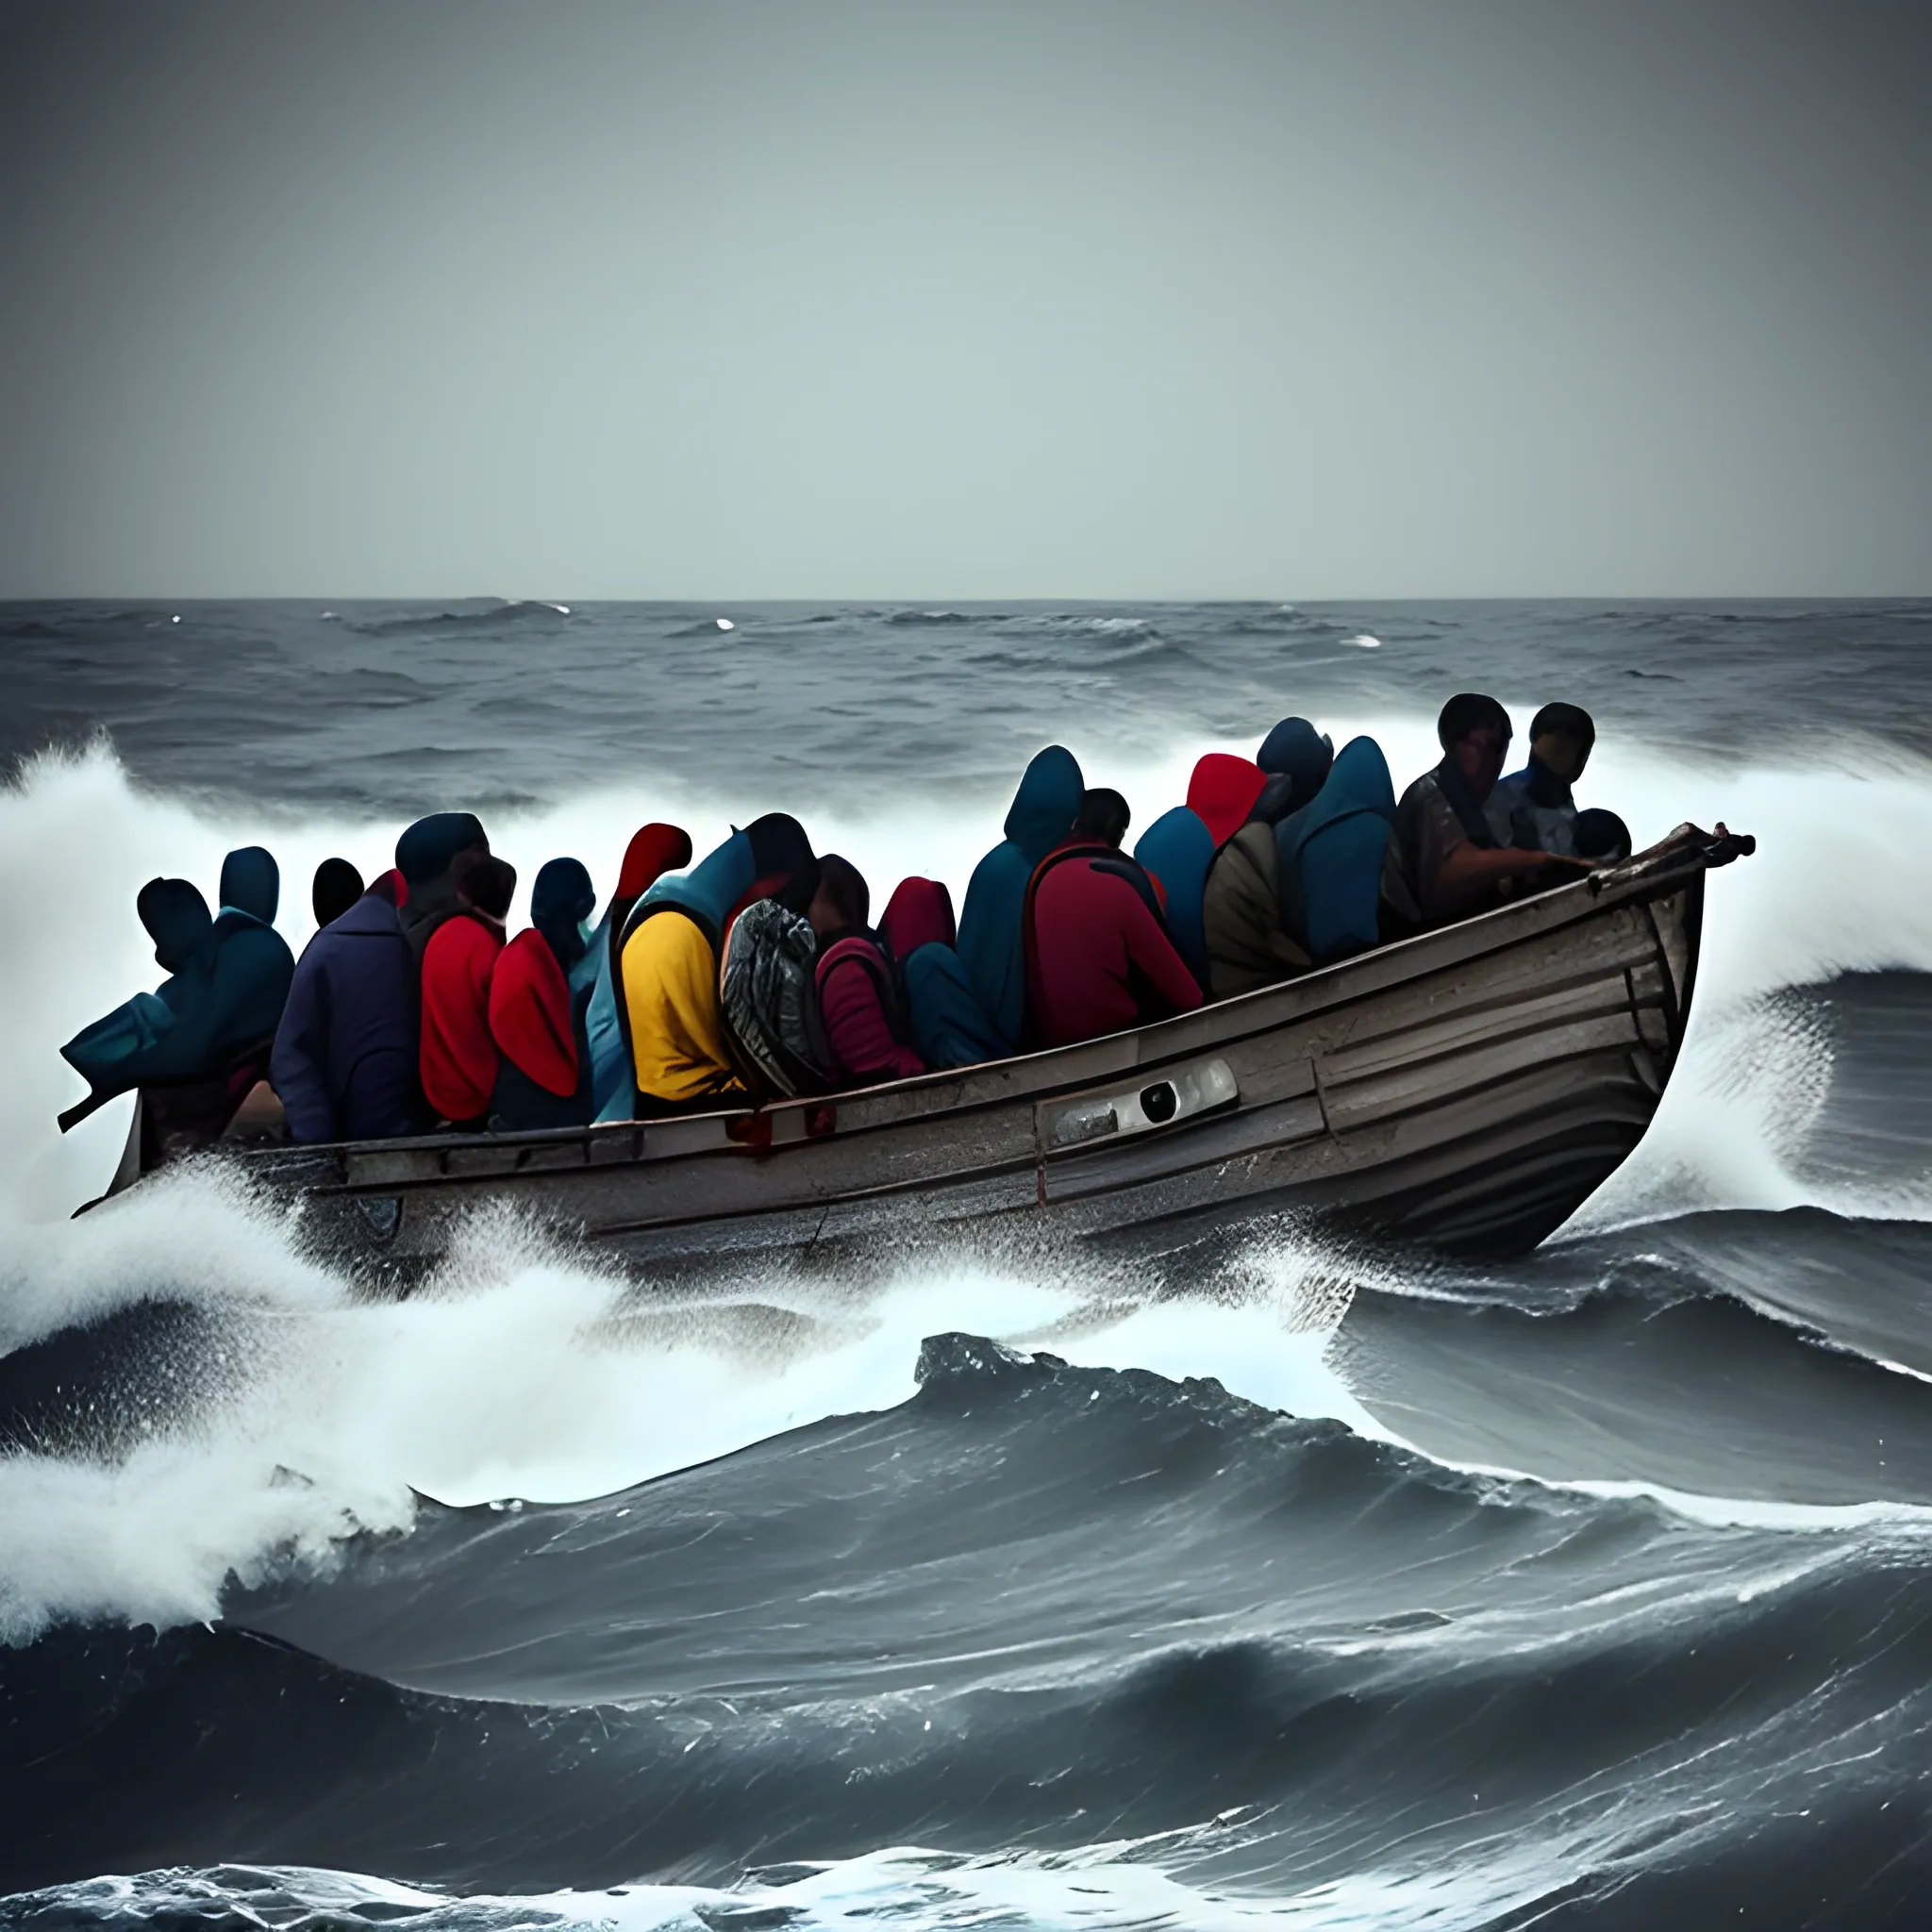 migrants in a boat on the stormy sea, photography